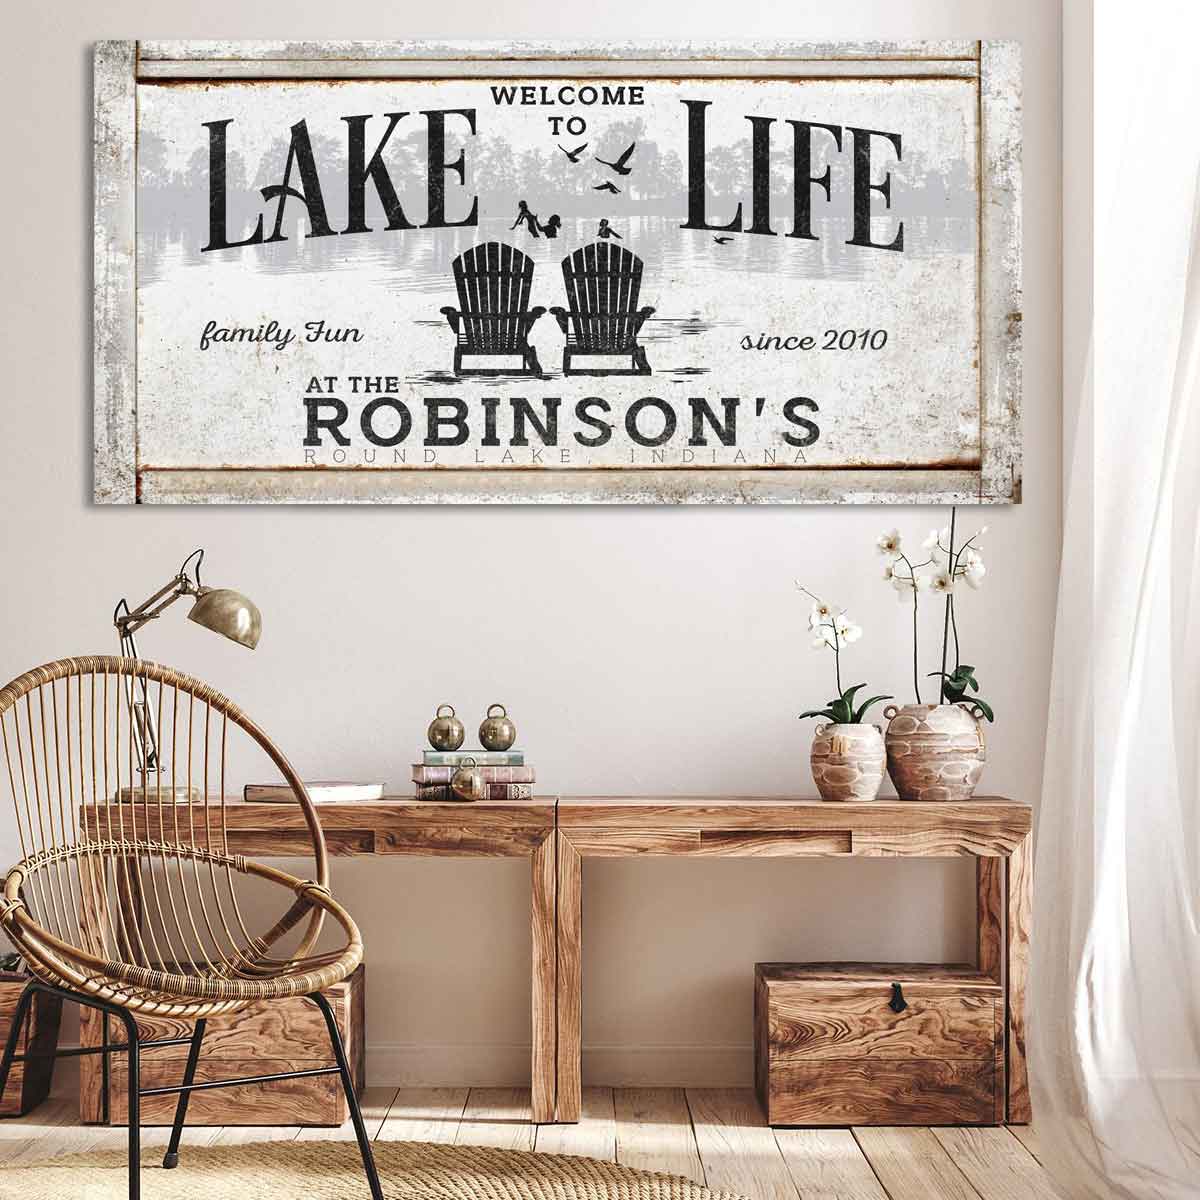 Personalized River House Sign, Boat House Sign, Lake House Signs, meta